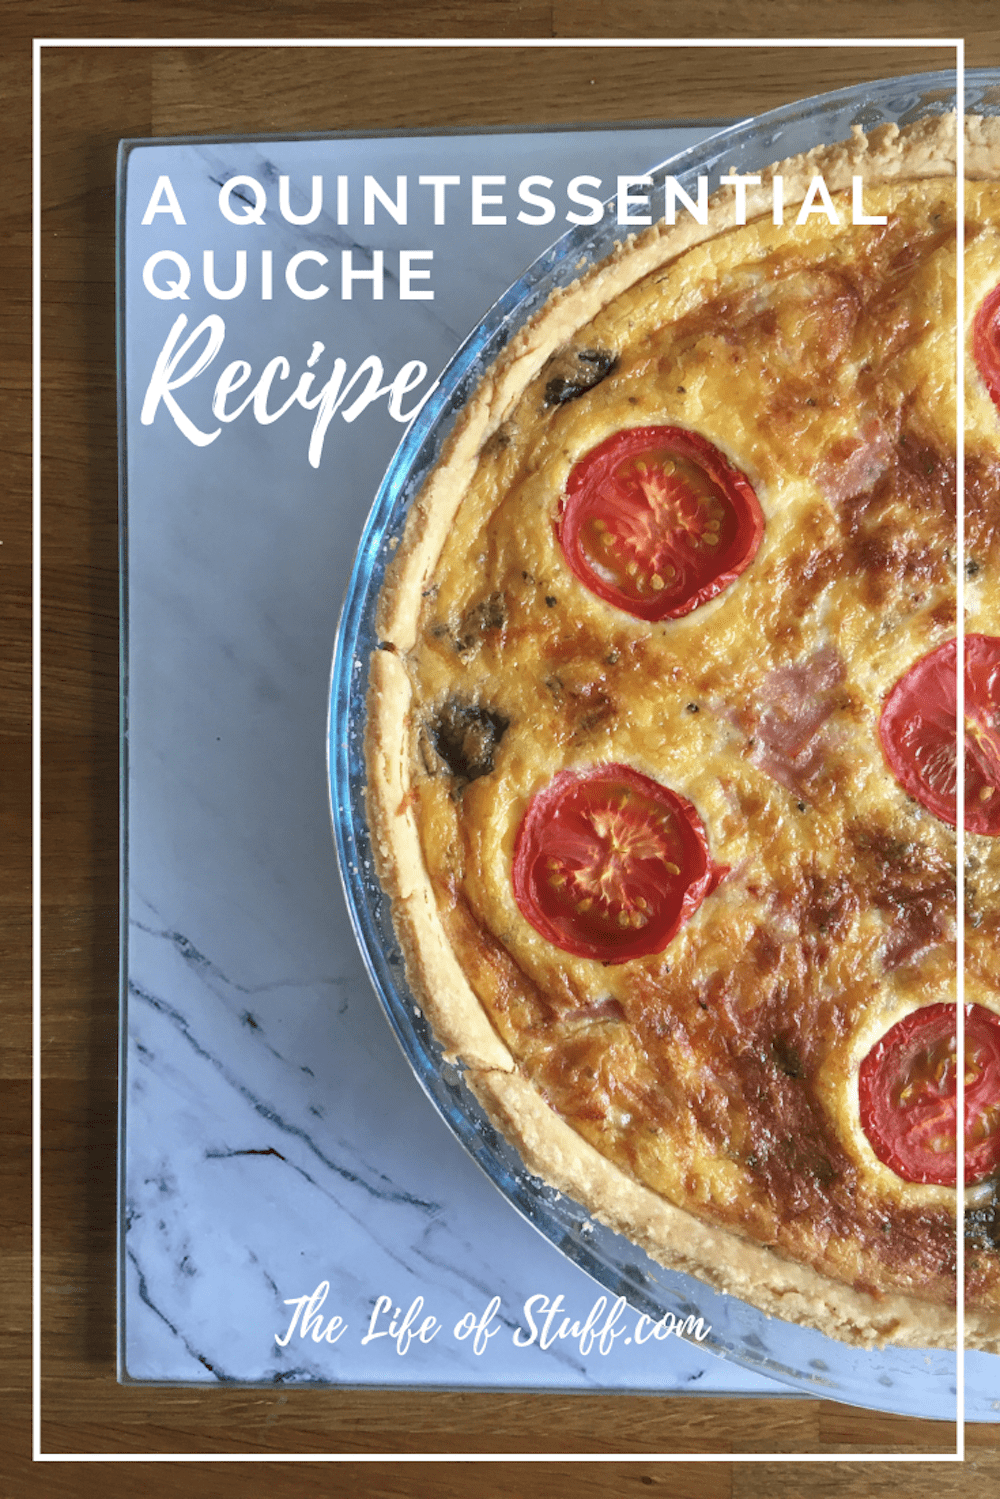 A Quality Quiche Recipe - Step by Step Photo Instructions - The Life of Stuff.com